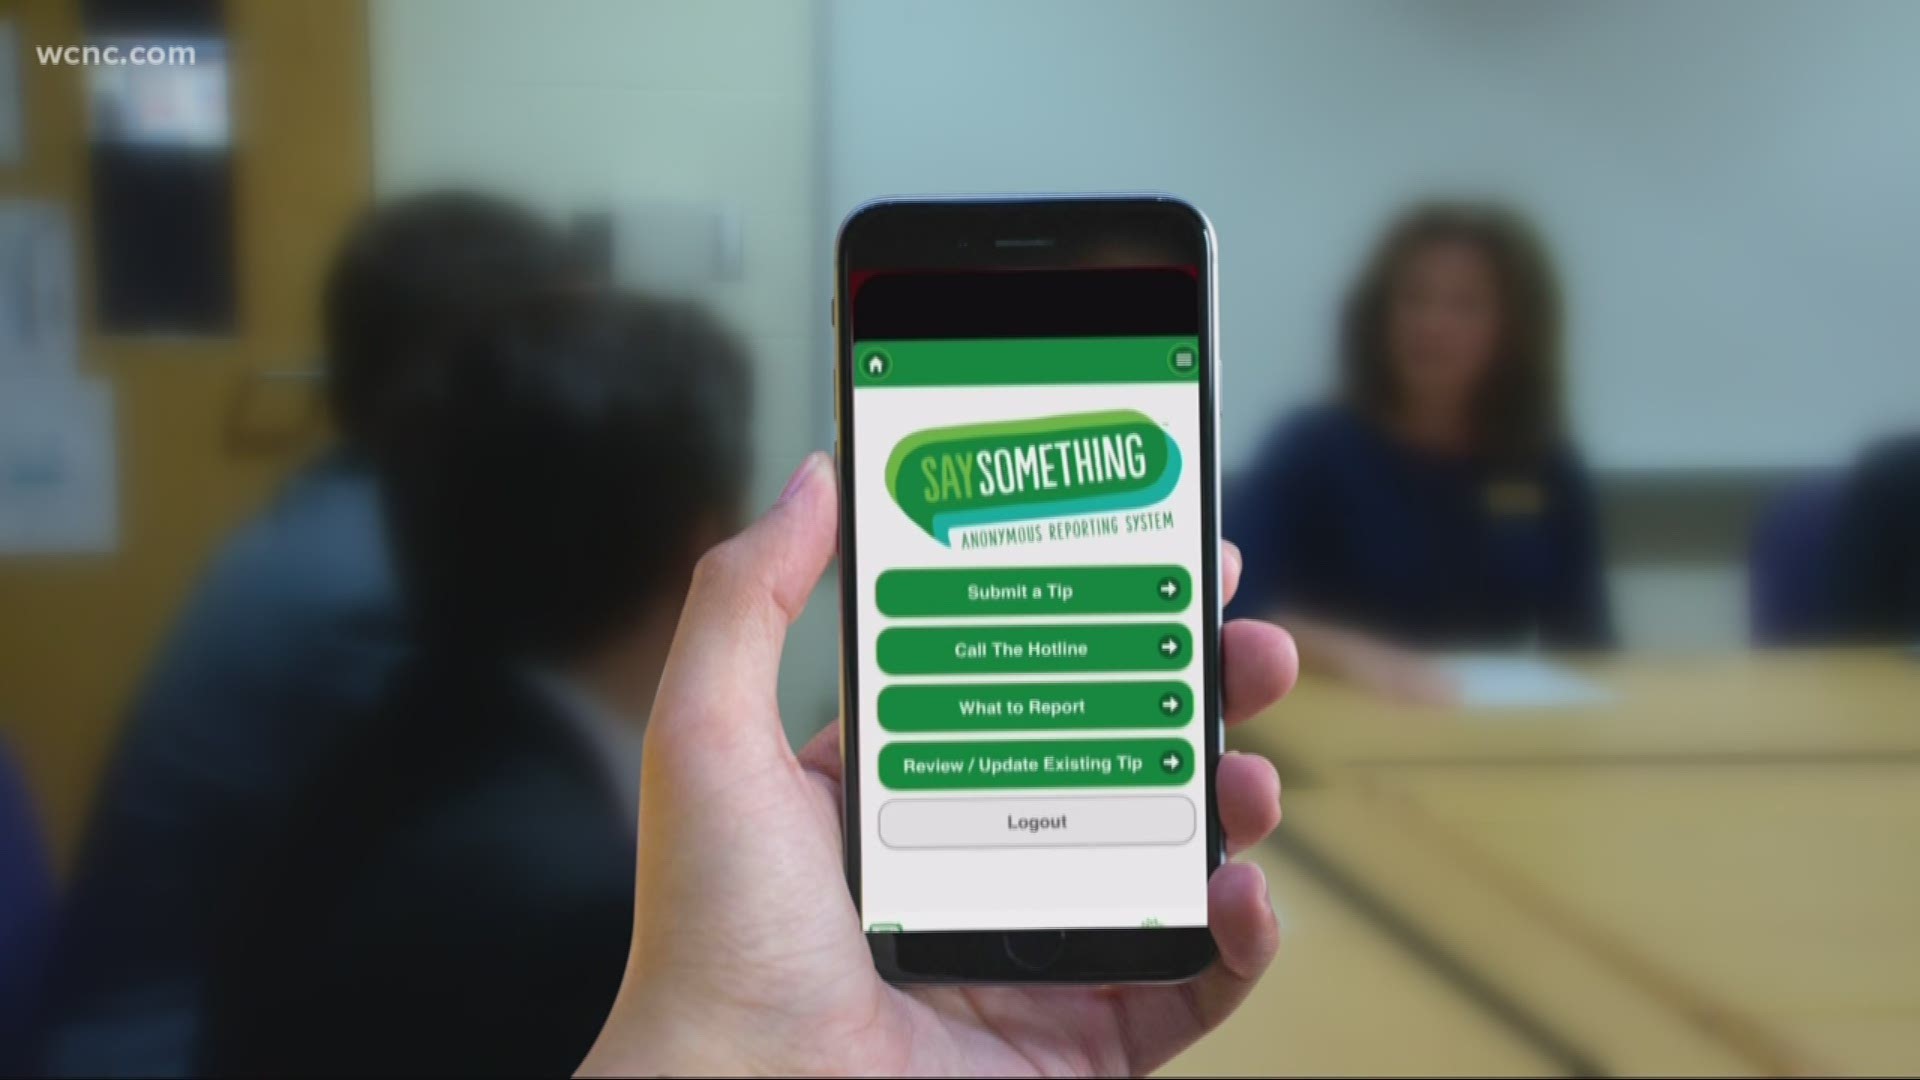 North Carolina State Superintendent Mark Johnson hopes cyberbullying and safety concerns can be fixed with a new app called Say Something. The app will allow students to report potentially dangerous activity.